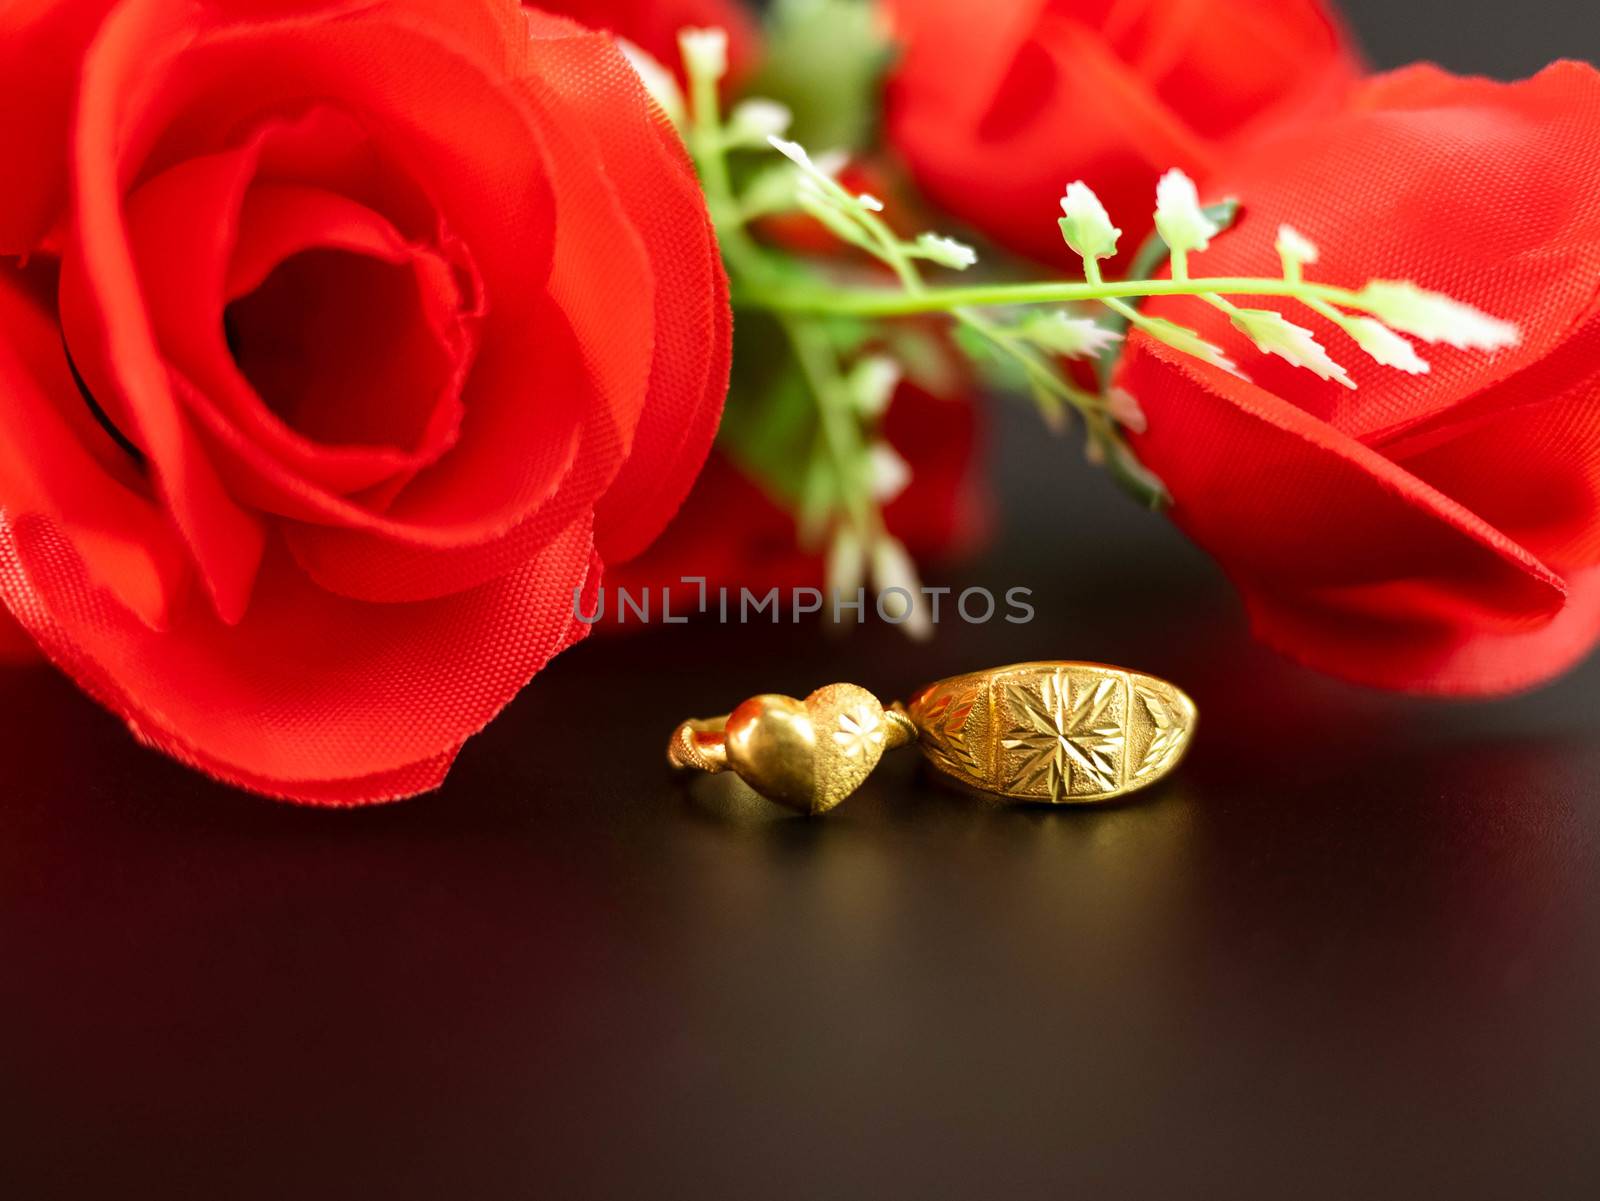 Wedding celebration on valentines day with red rose bouquet, wedding rings, isolated on dark background. Concept of love and romance.